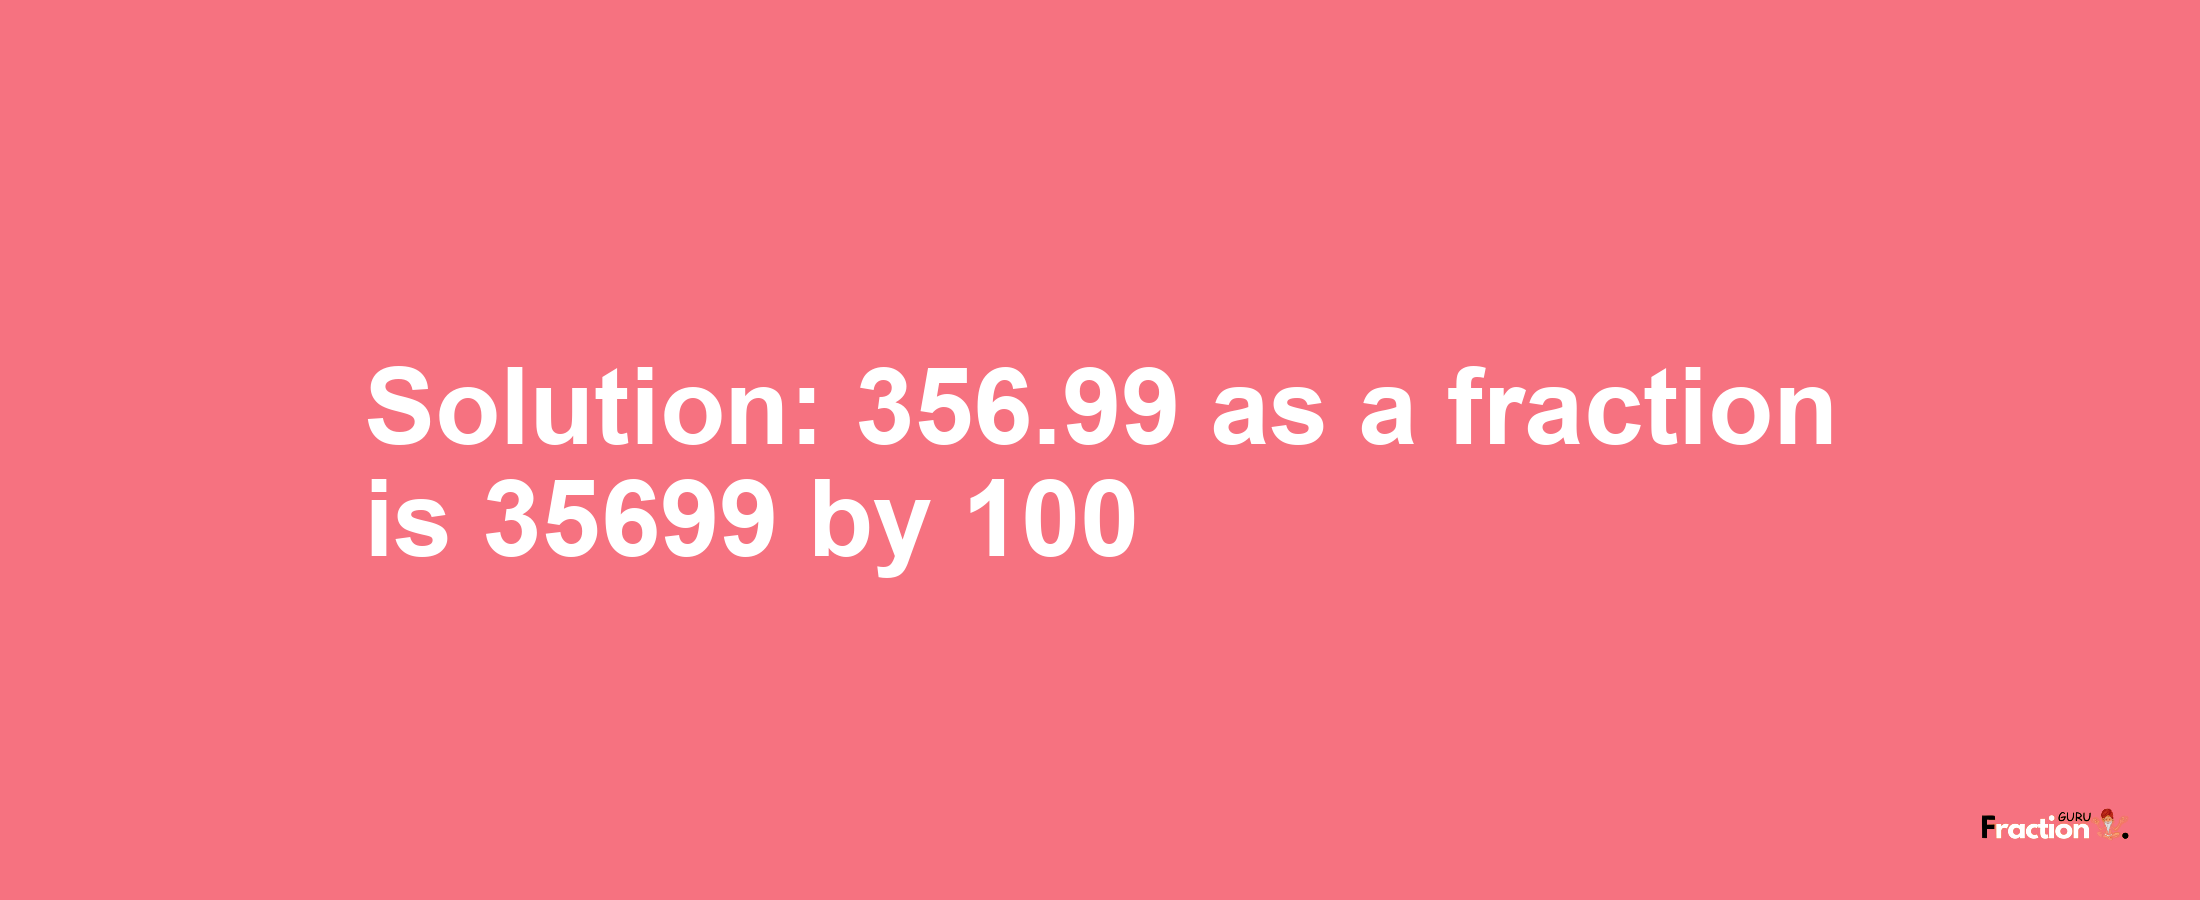 Solution:356.99 as a fraction is 35699/100